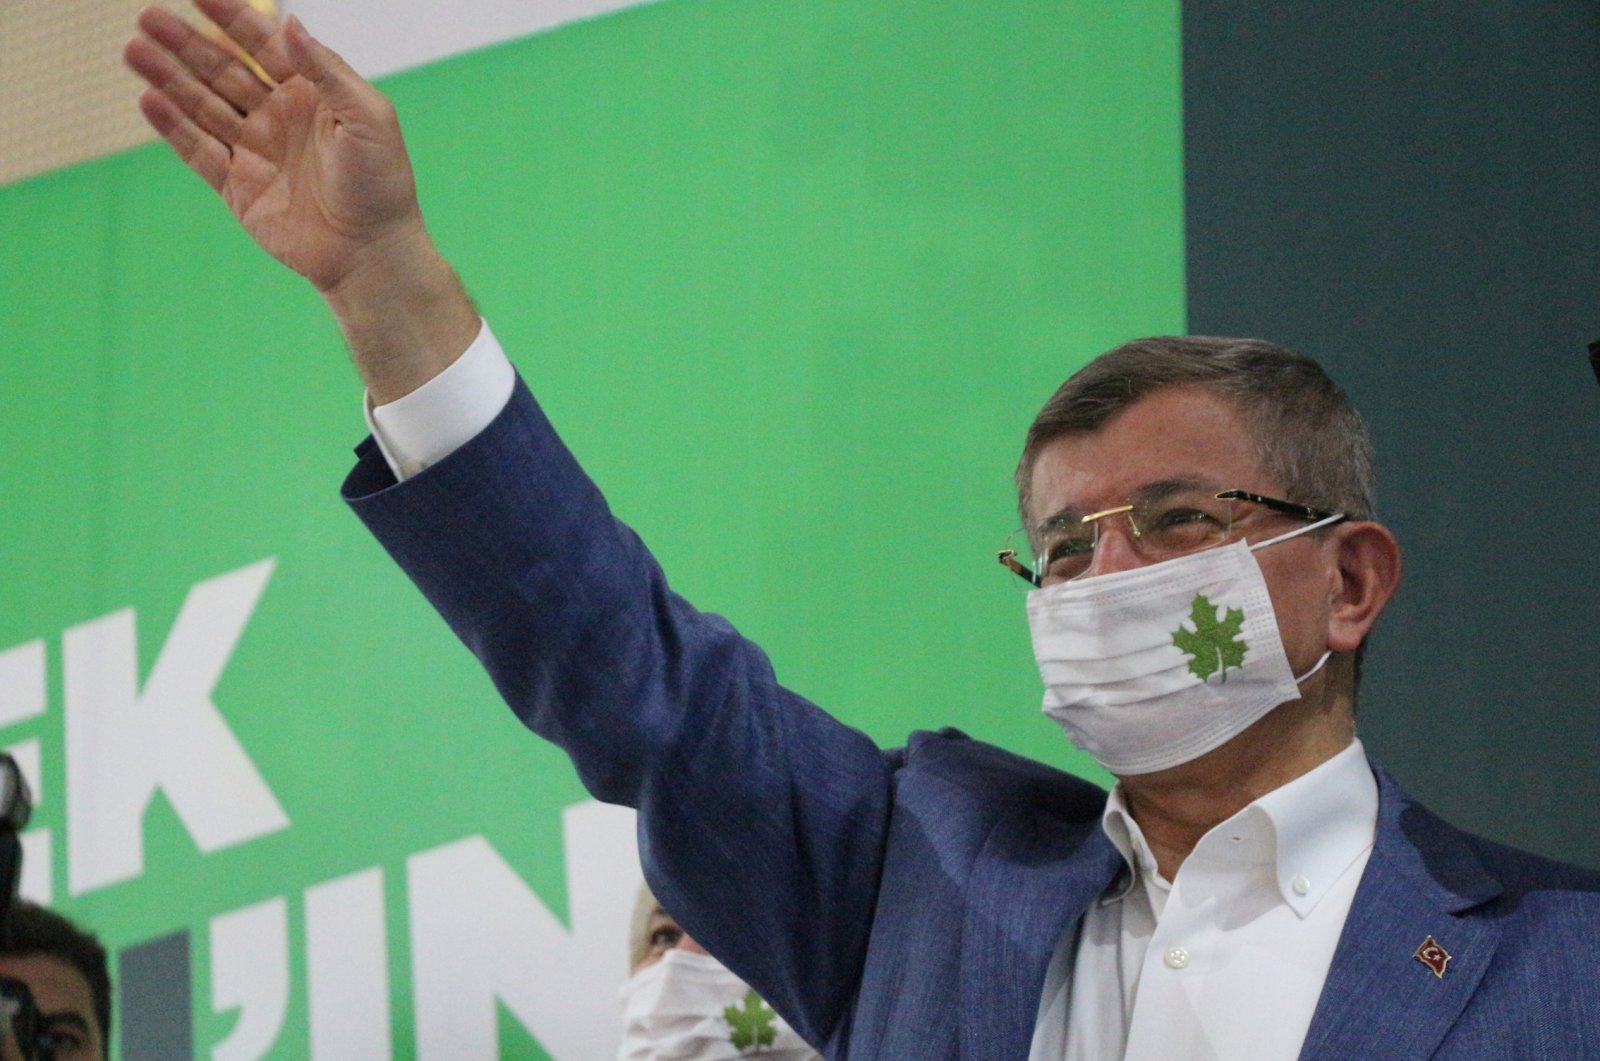 Future Party (GP) Chairman Ahmet Davutoğlu waves to the audience during his party's provincial congress in the eastern city of Batman, Turkey, July 25, 2020. (DHA Photo)